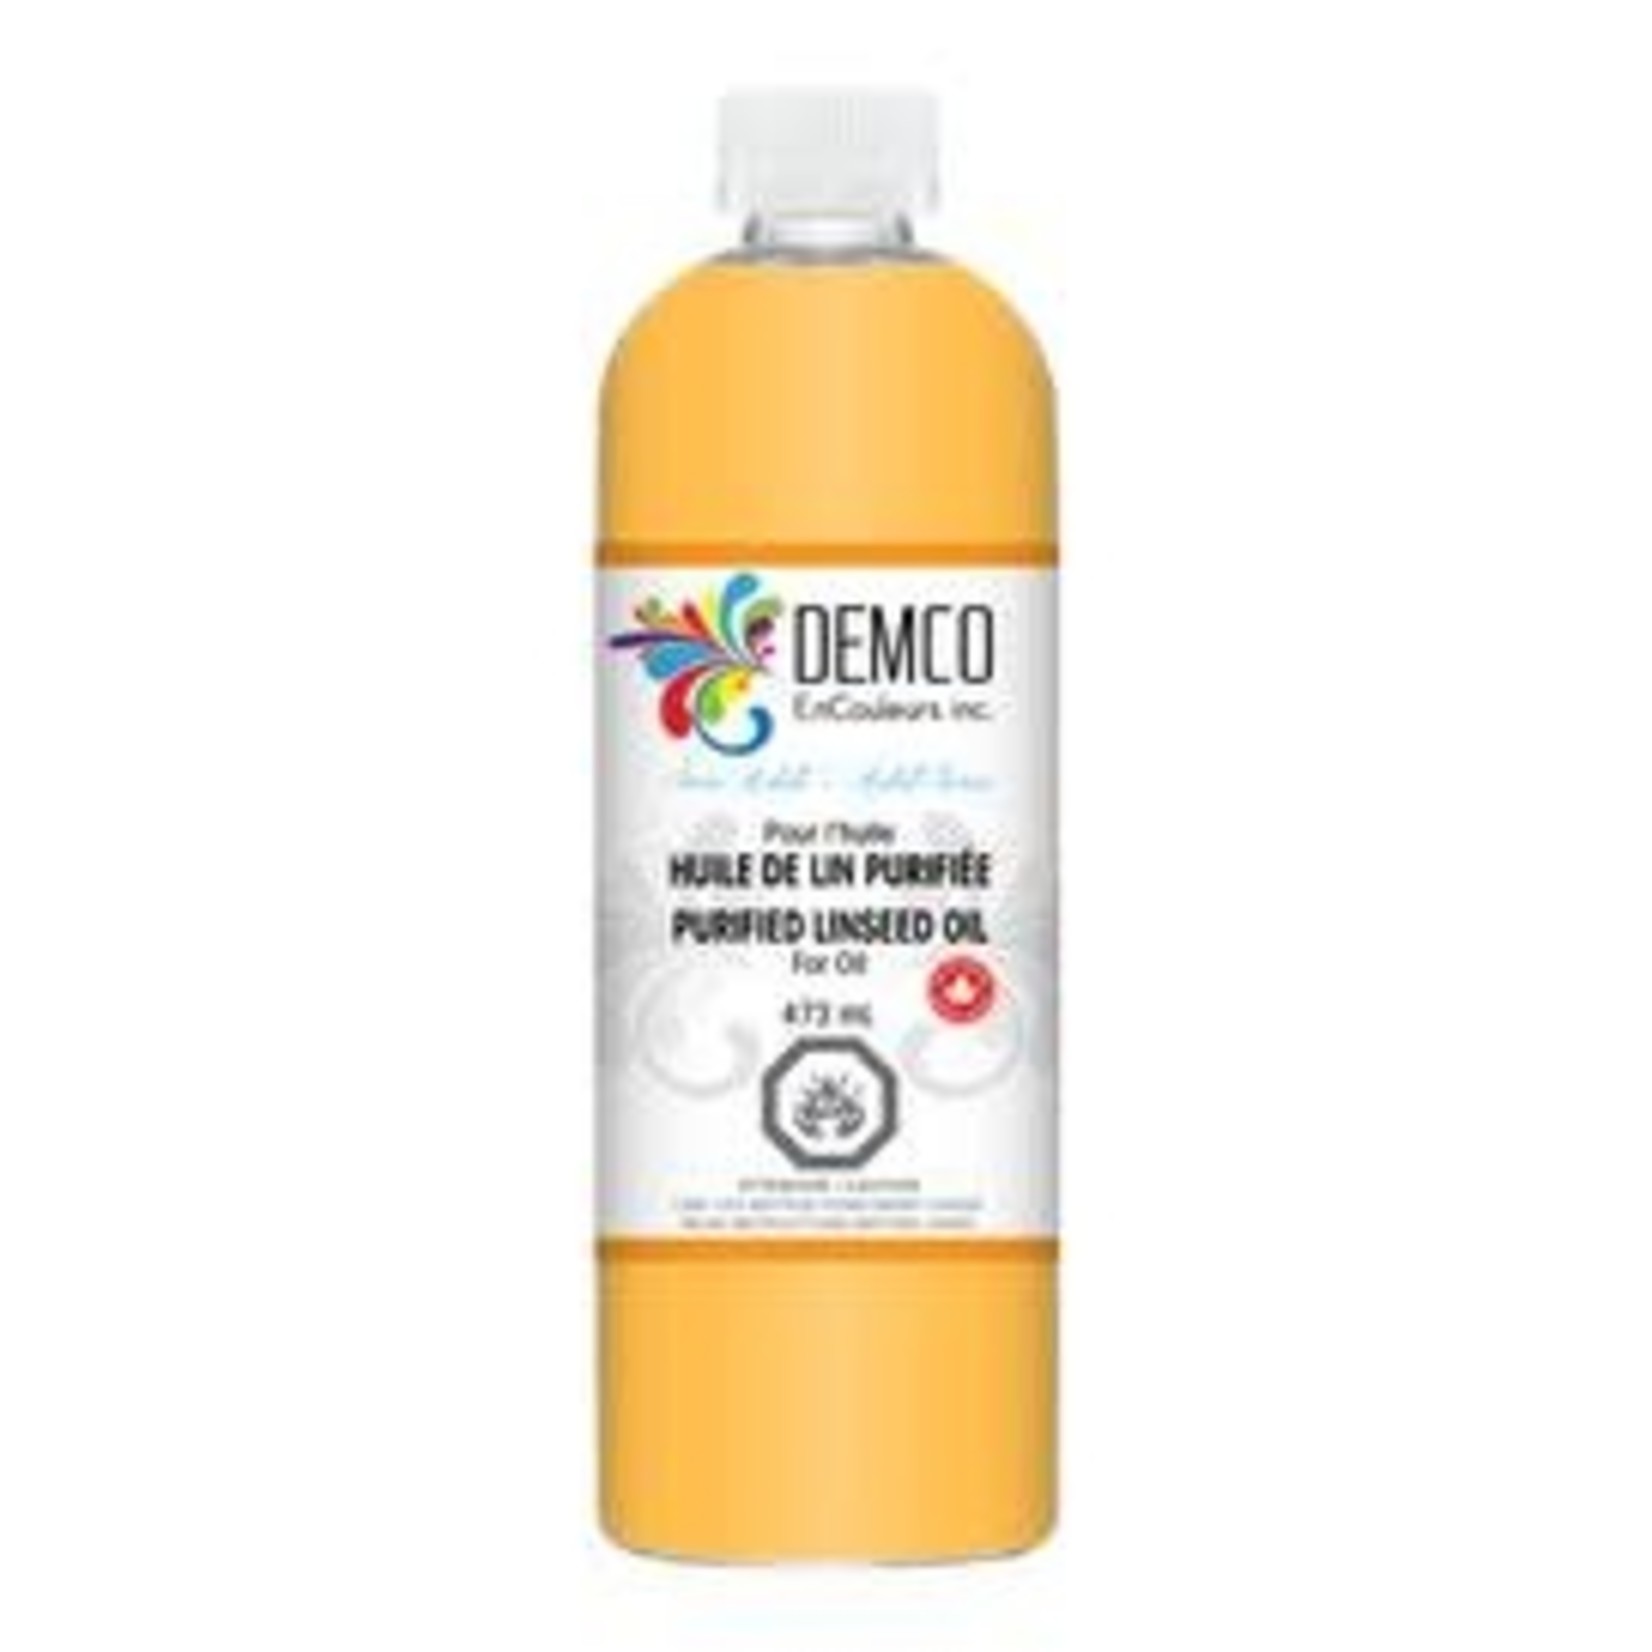 DEMCO DEMCO PURIFIED LINSEED OIL 1L / 33OZ